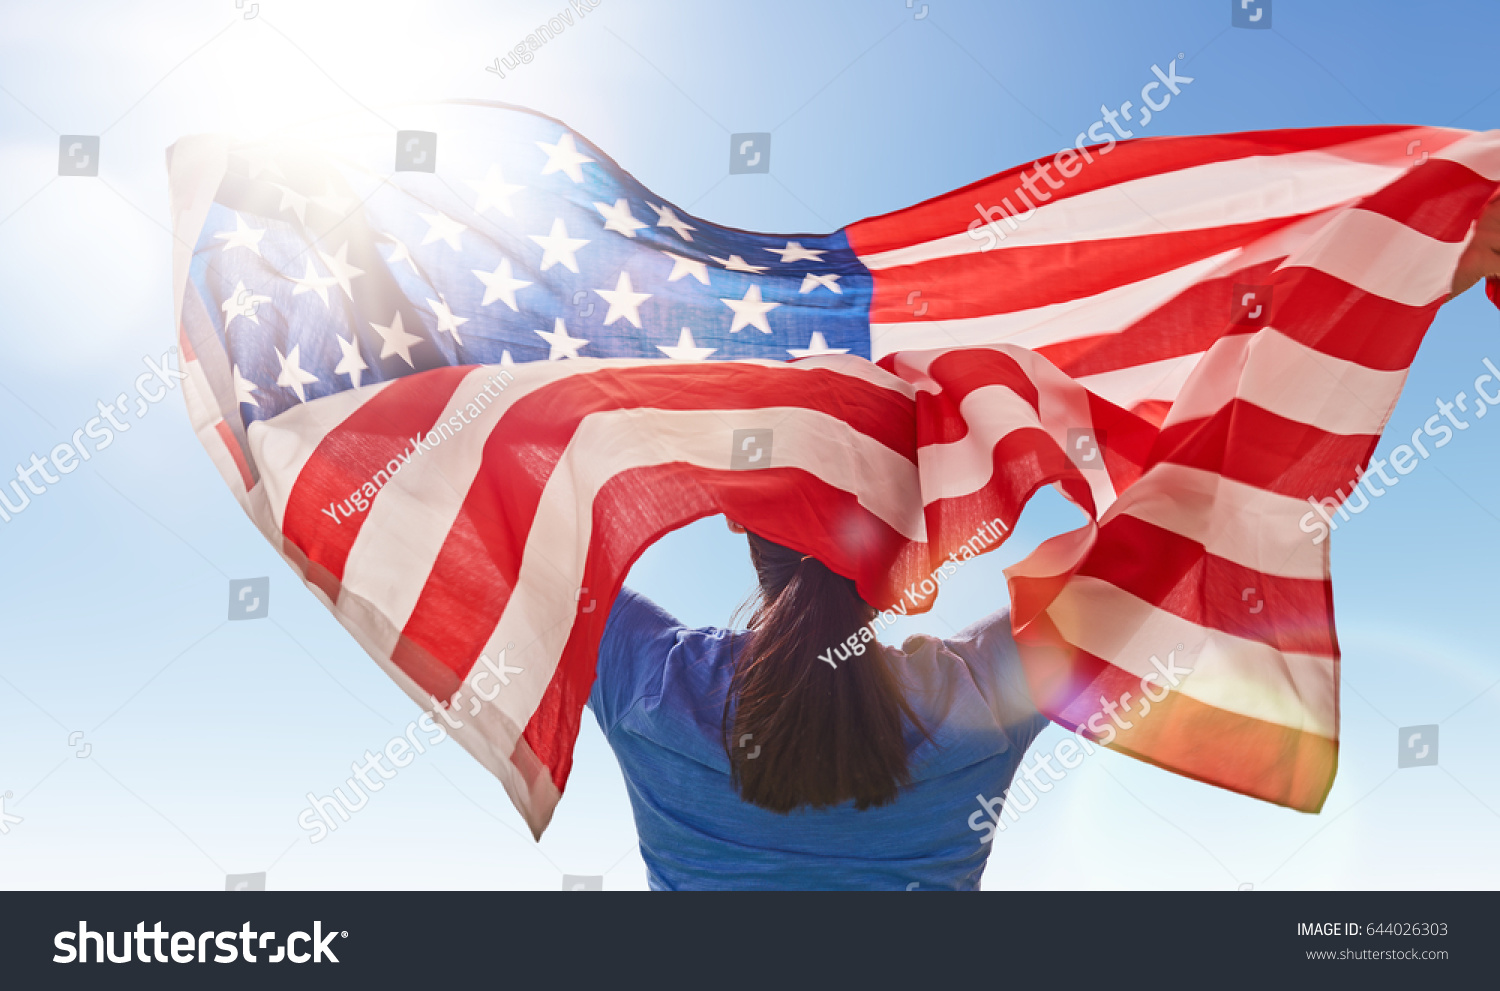 Patriotic holiday. Happy young woman with American flag. USA celebrate 4th of July. #644026303